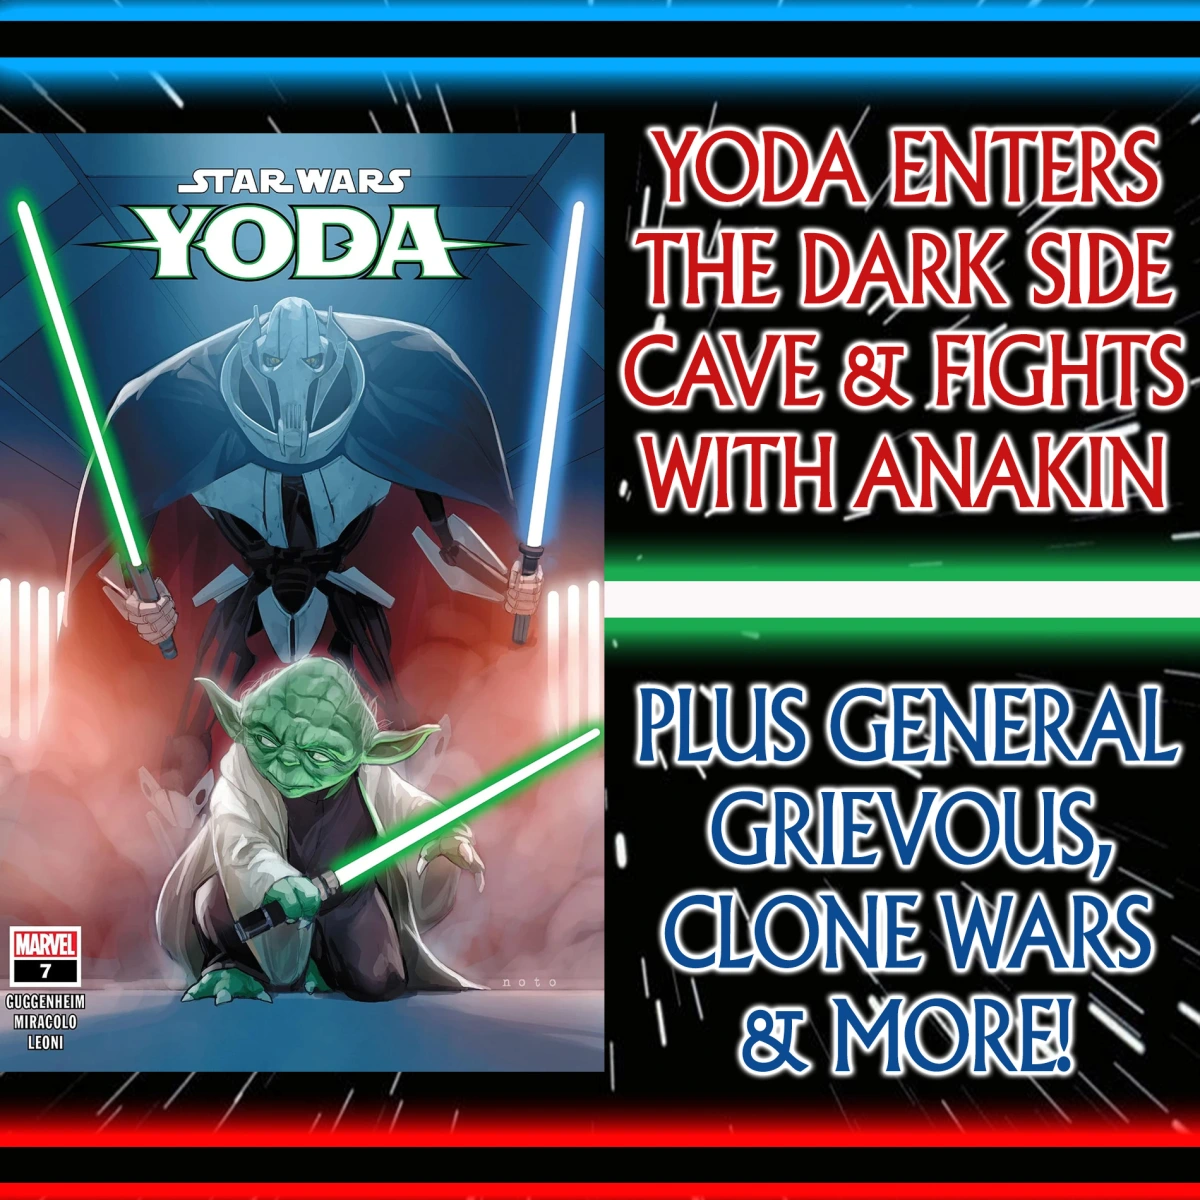 Star Wars: Comics In Canon – Yoda Series Vol 2: Yoda Enters The Dark Side Cave And An Old Mission With Anakin, Plus General Grievous & The Cave of Evil (Yoda Volume 2: #7-10) – Ep 139